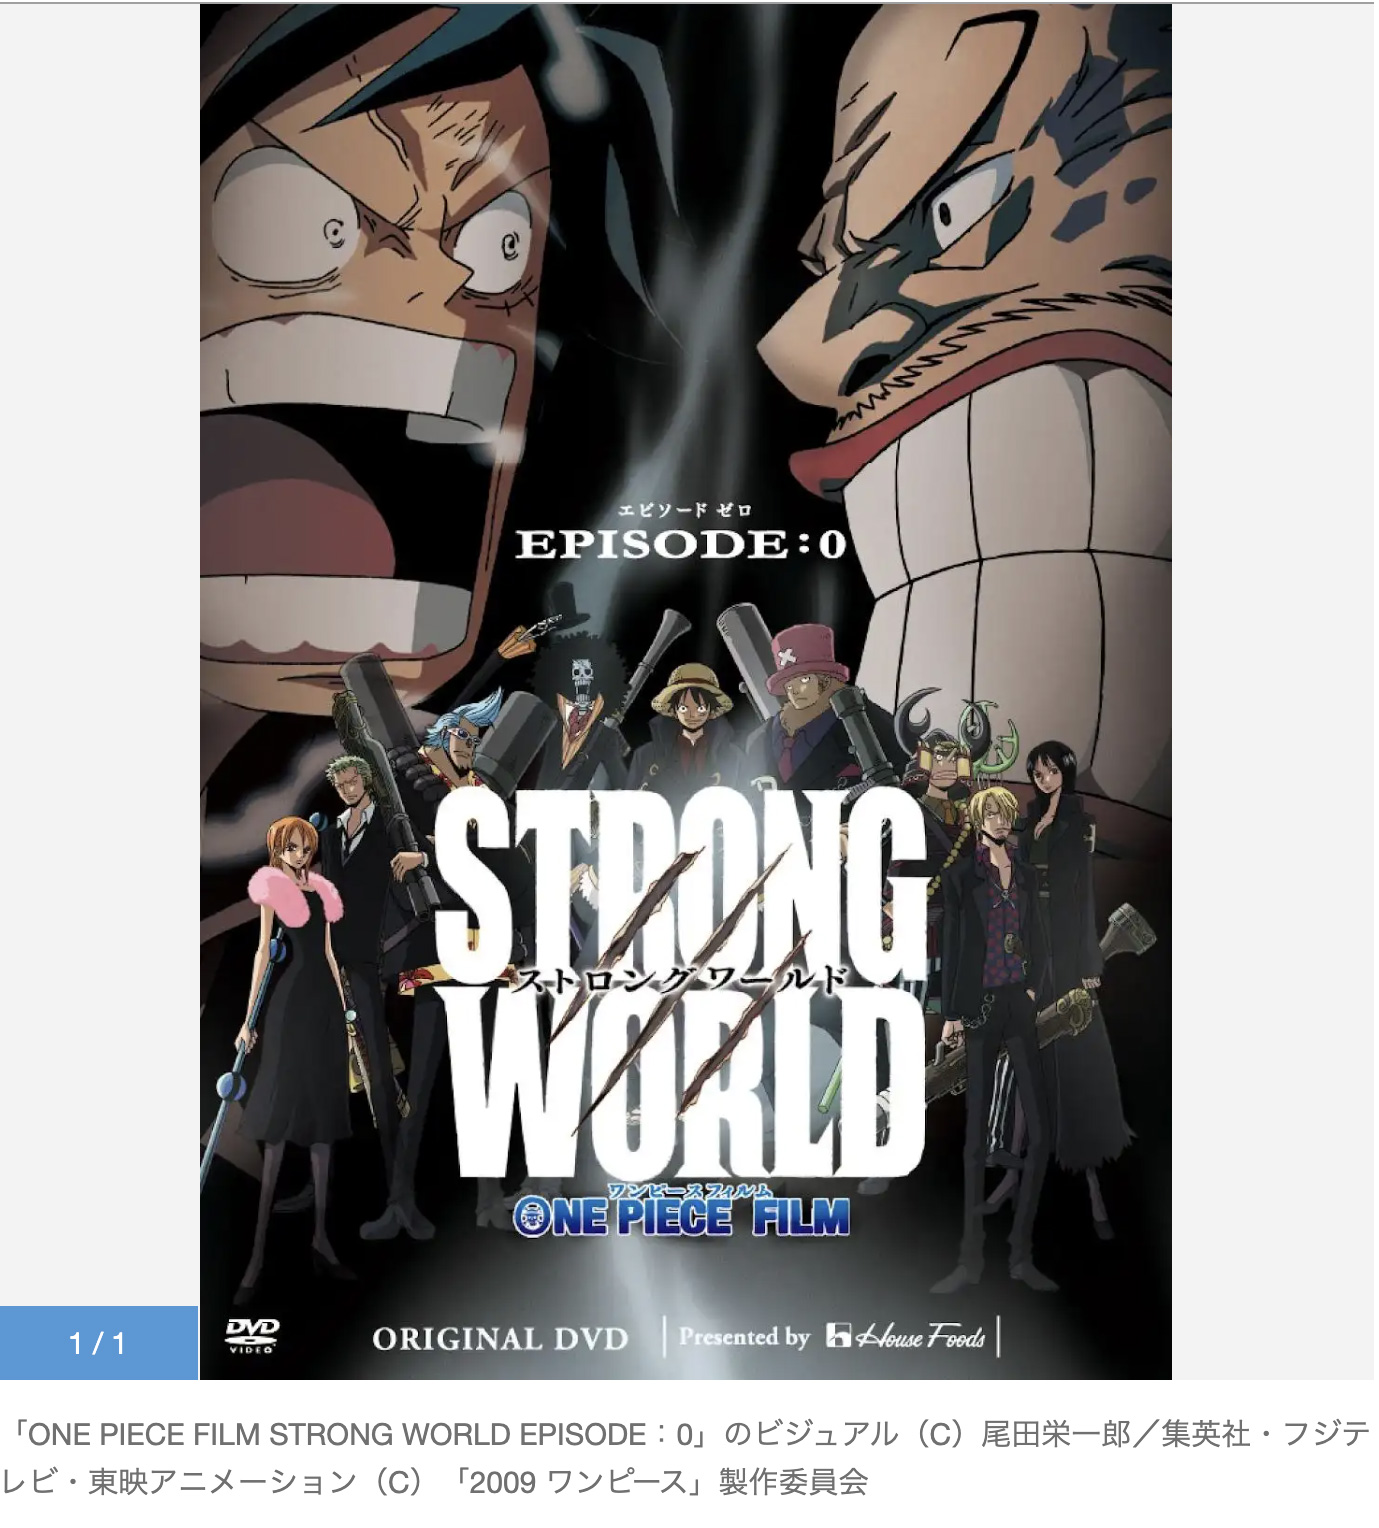 Original One Piece Anime Poster, Strong World